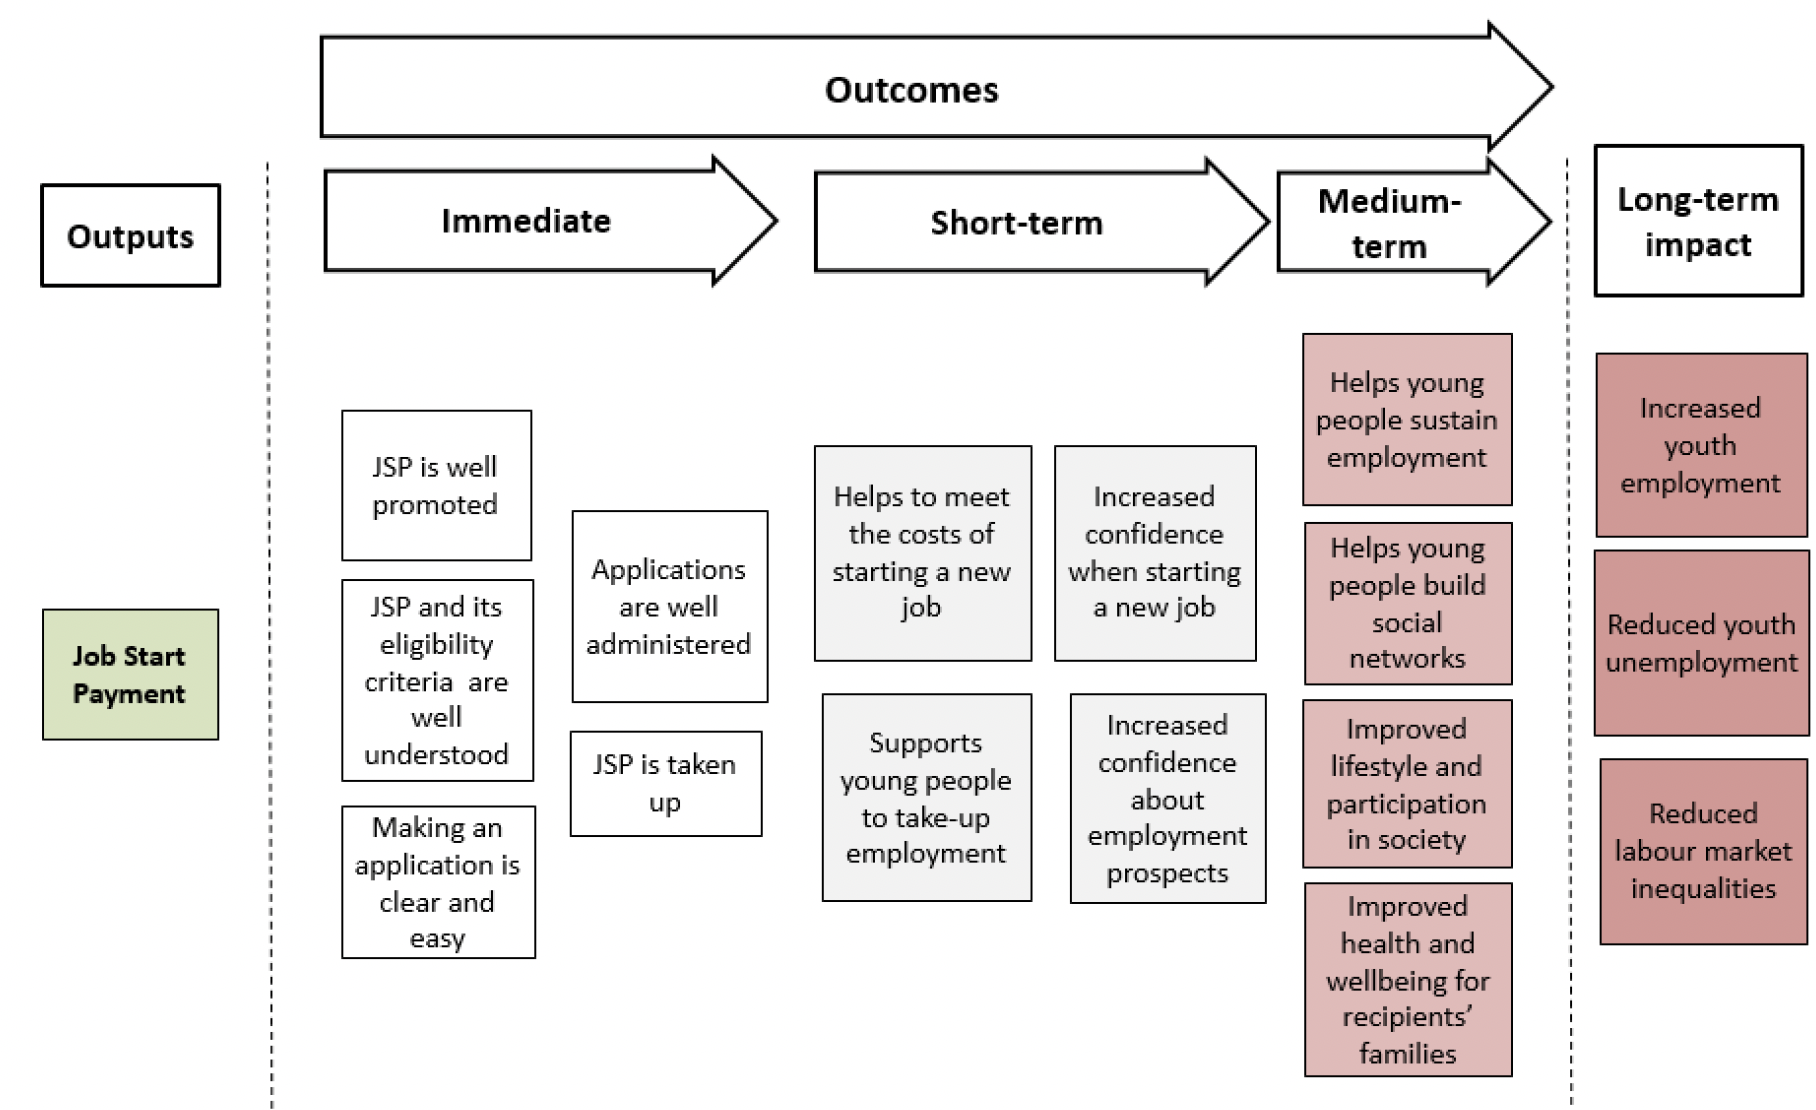 Figure 1 shows the logic model that illustrates the chain of outcomes linking the payment of Job Start Payment to immediate, short-term, and medirum-term outcomes. It also shows the long-term outcomes which Job Start Payment would be expected to contribute towards. The policy outcomes are listed in the text below. 